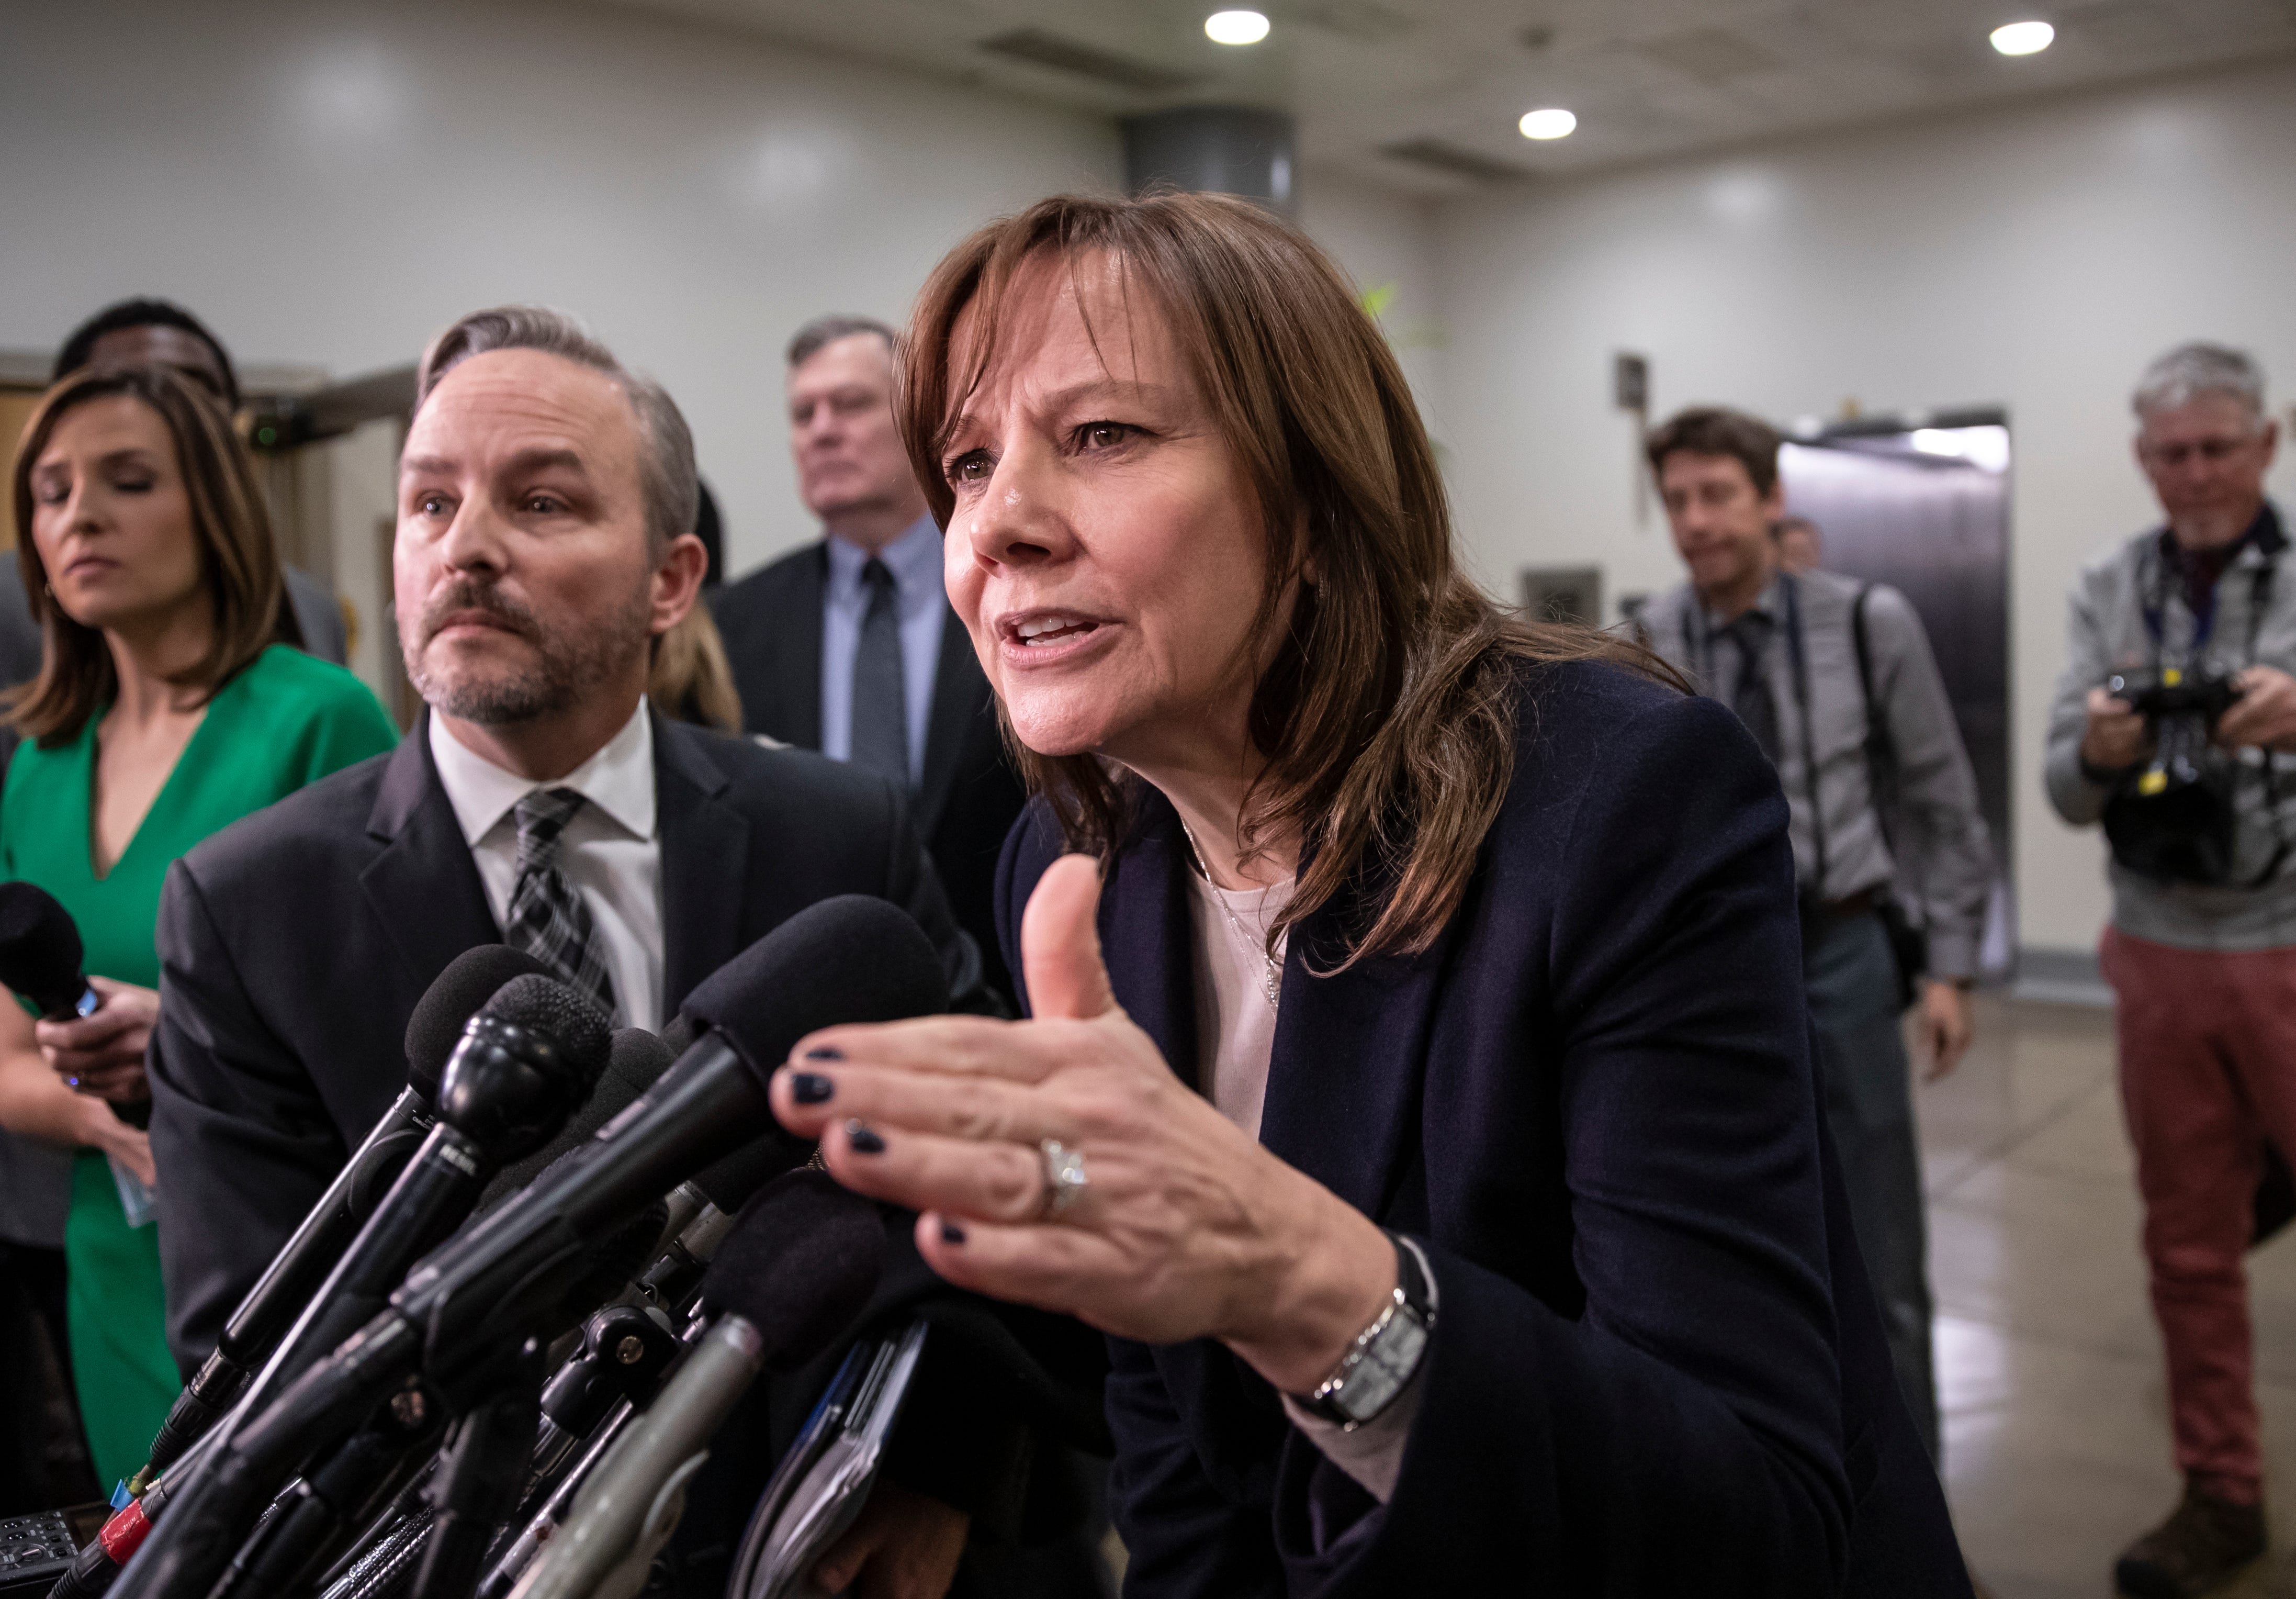 General Motors CEO Mary Barra speaks to reporters after meeting with the Michigan congressional delegation to discuss plans for the massive restructuring by the Detroit-based automaker, on Capitol Hill in Washington, Thursday, Dec. 6, 2018.